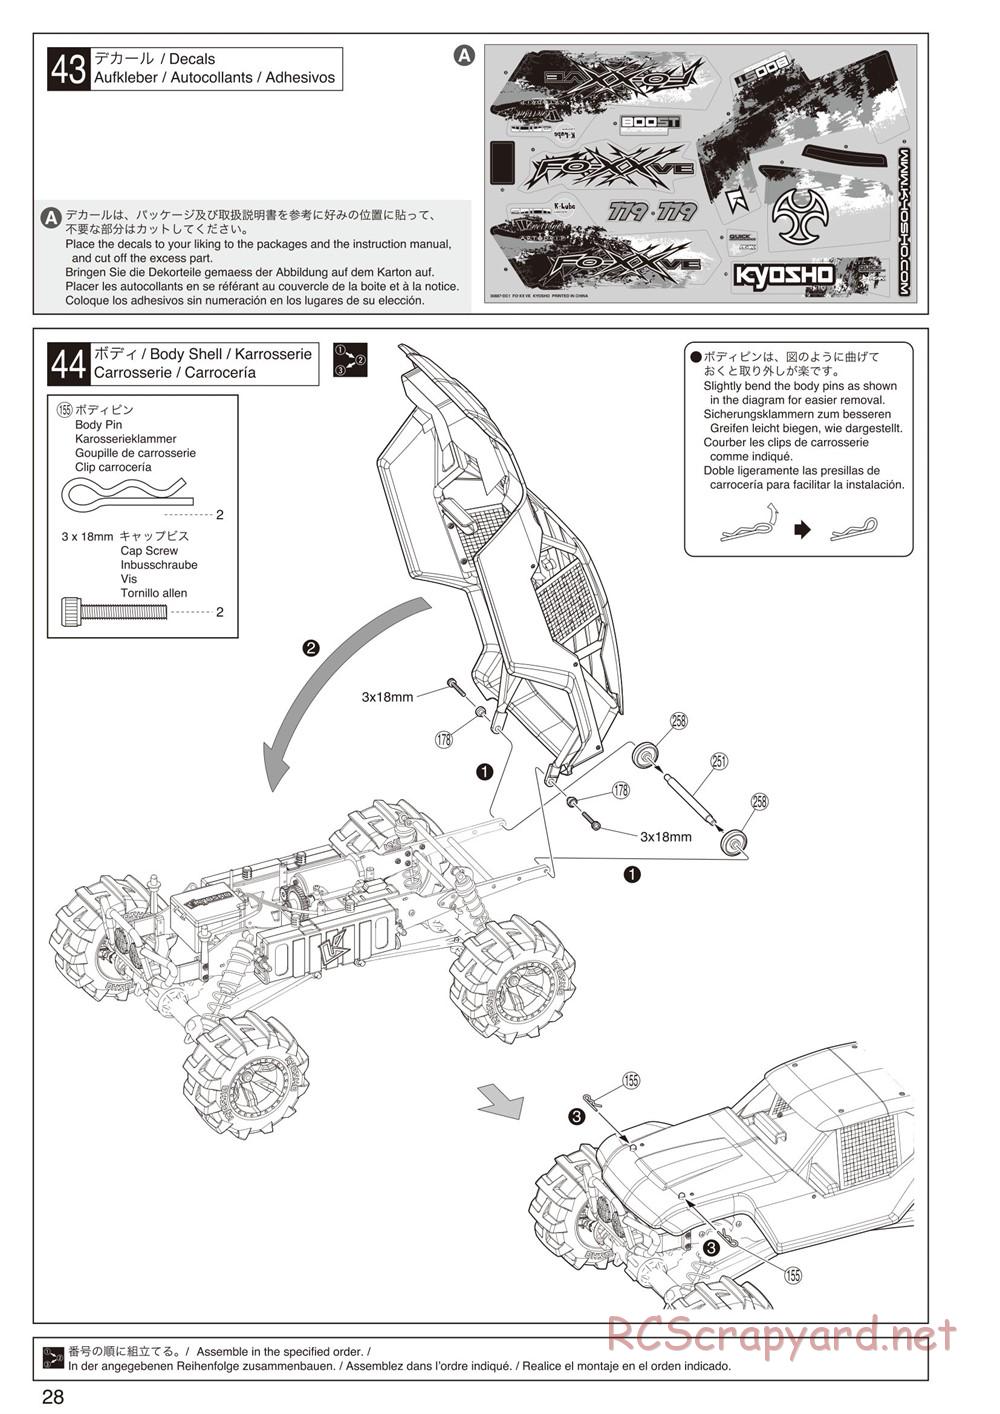 Kyosho - FO-XX VE - Manual - Page 28